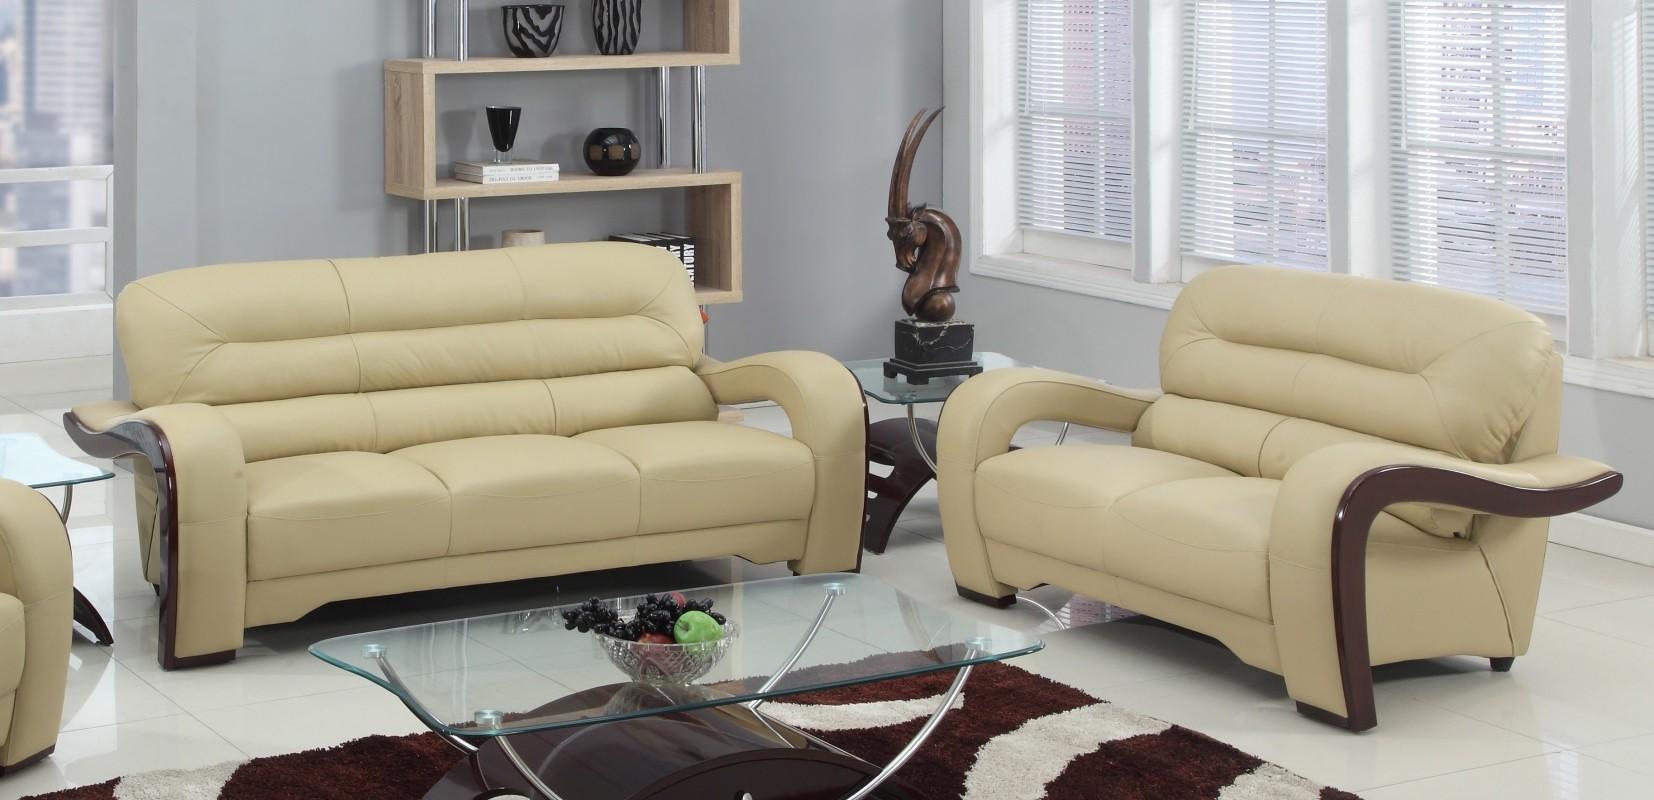 Contemporary, Modern Sofa and Loveseat Set 992 992-BEIGE-2PC in Beige Leather Match